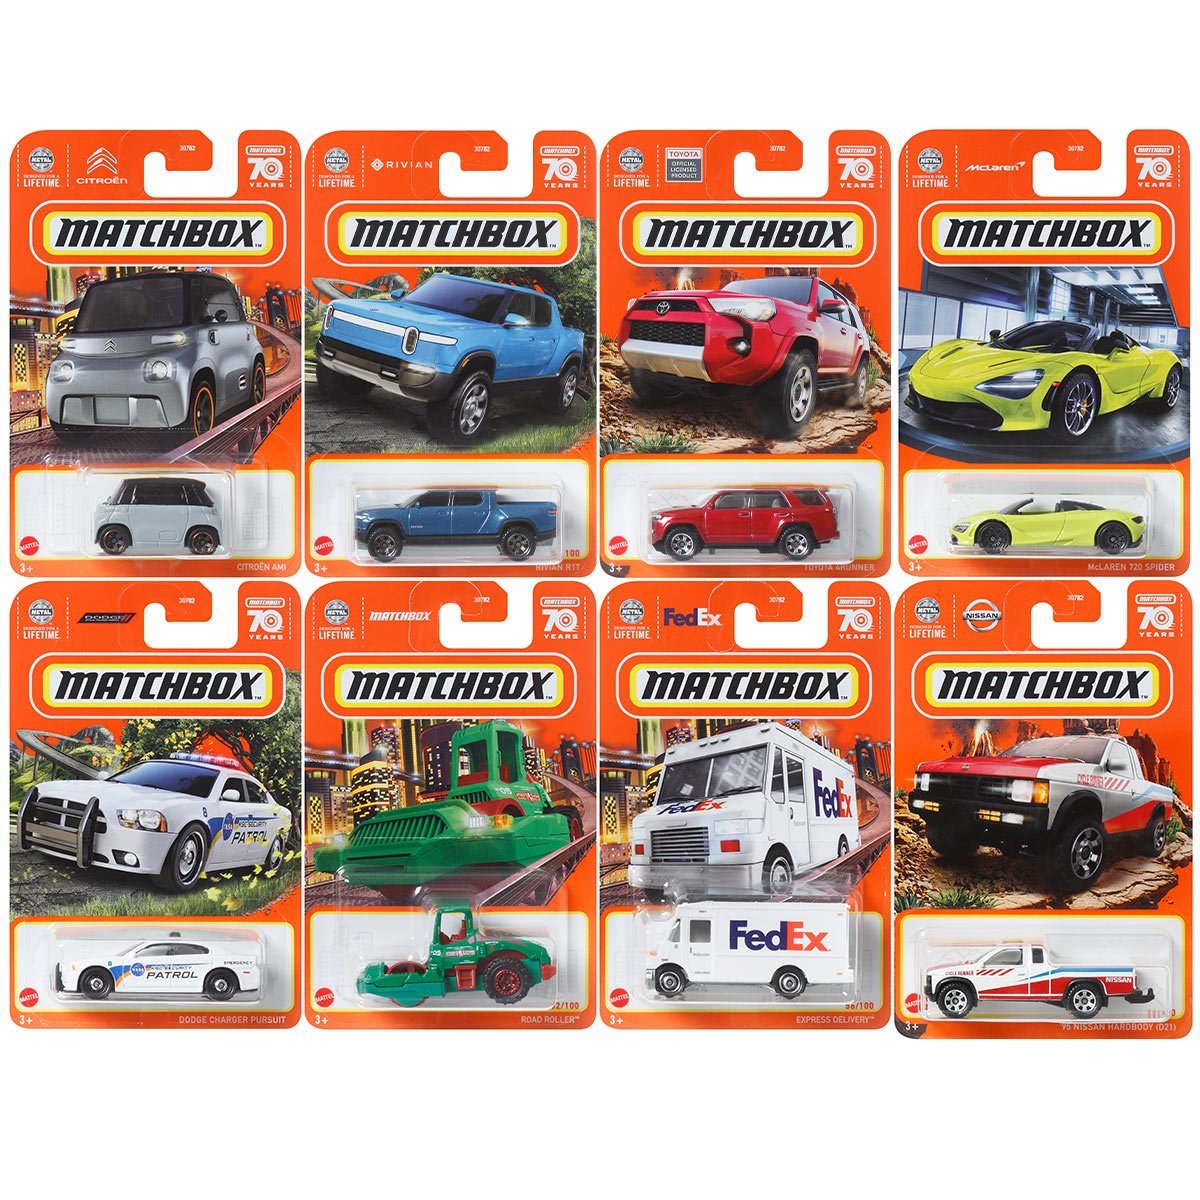 Matchbox Car Collections: A Treasure Trove for Enthusiasts